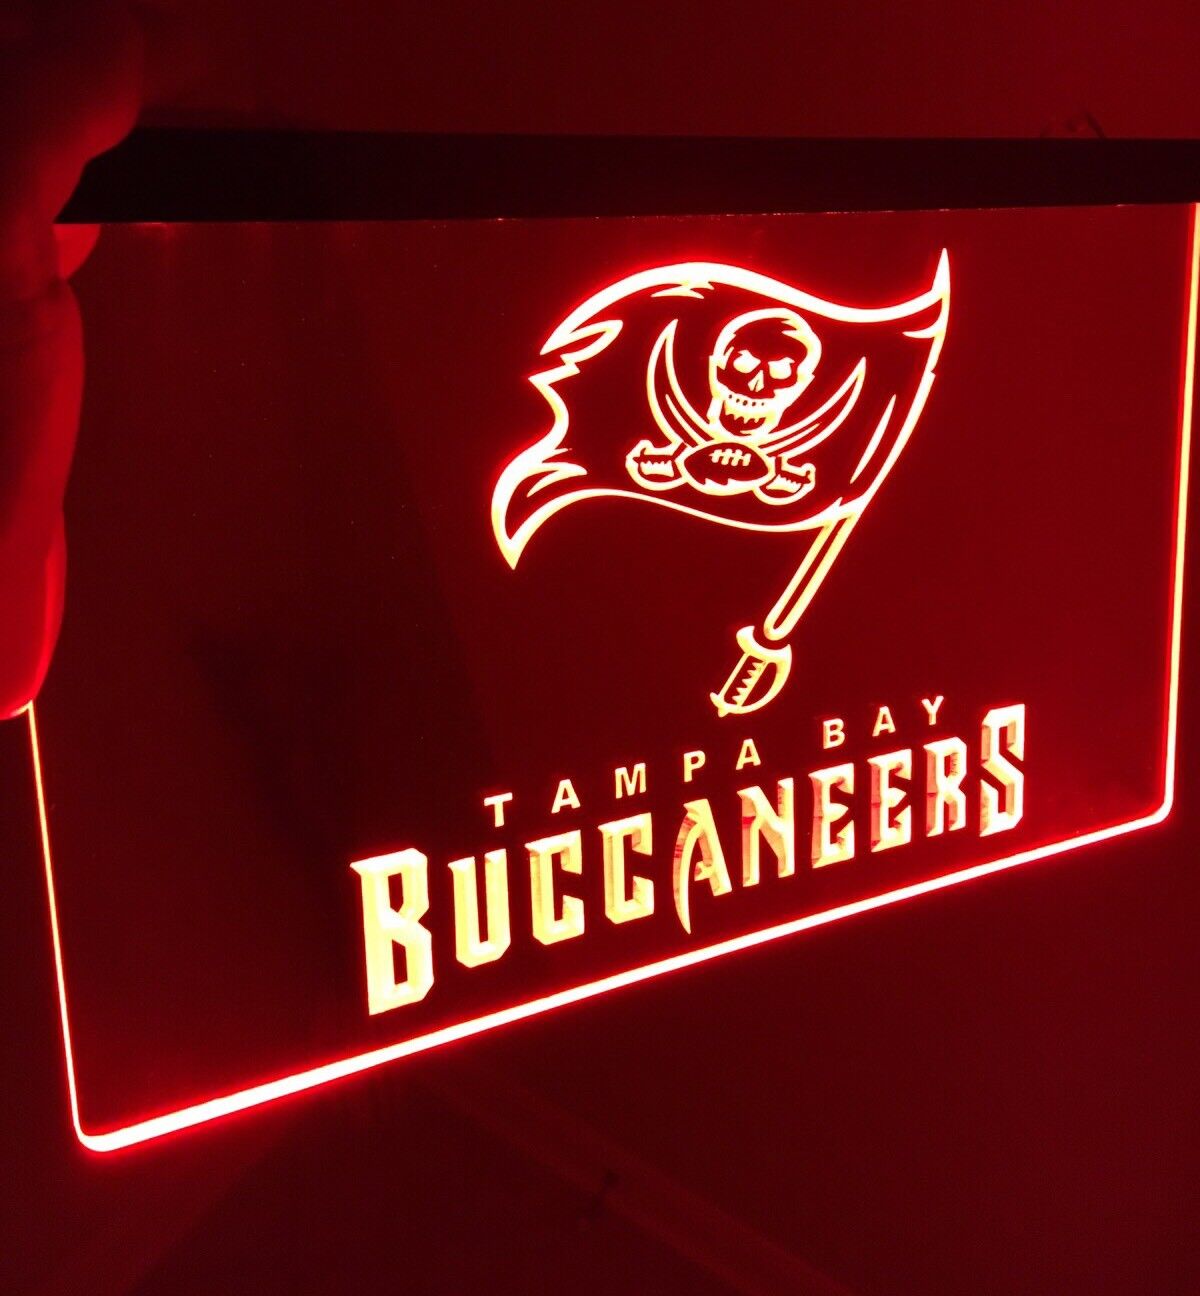 NFL TAMPA BAY BUCCANEERS Led Light Neon Sign for Game Room,Office,Bar,Man Cave.